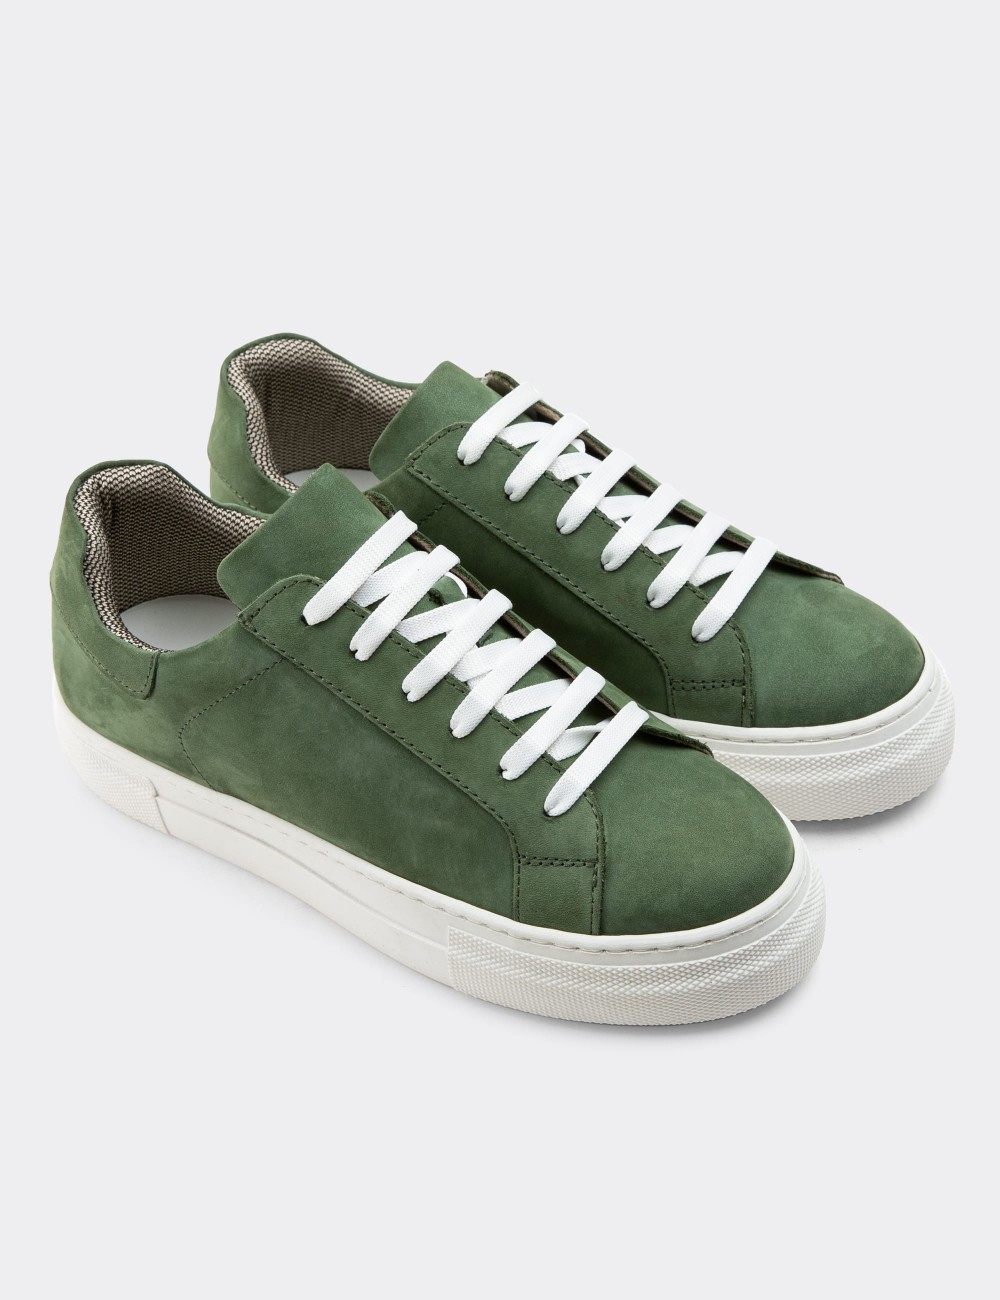 Green Suede Leather Sneakers - Z1681ZYSLC02